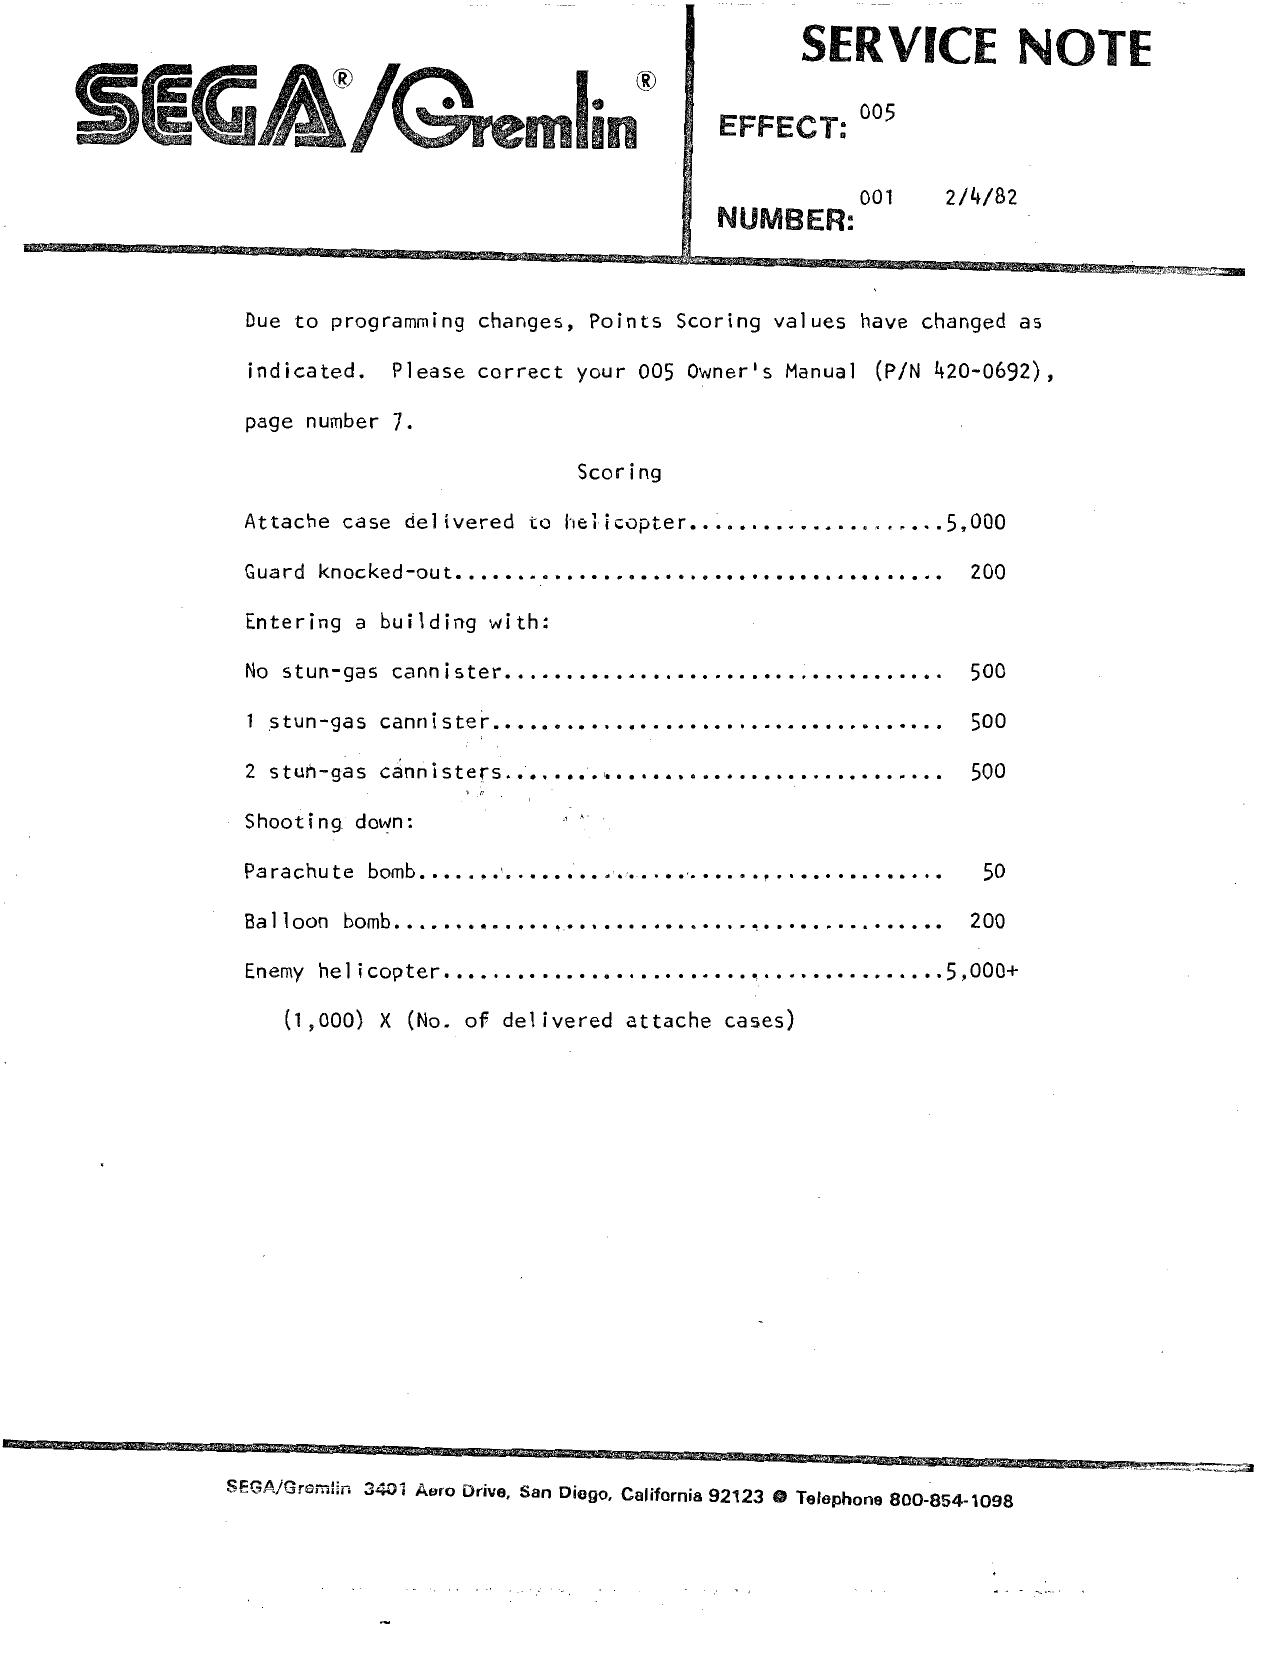 005 Service Note (02-04-82)